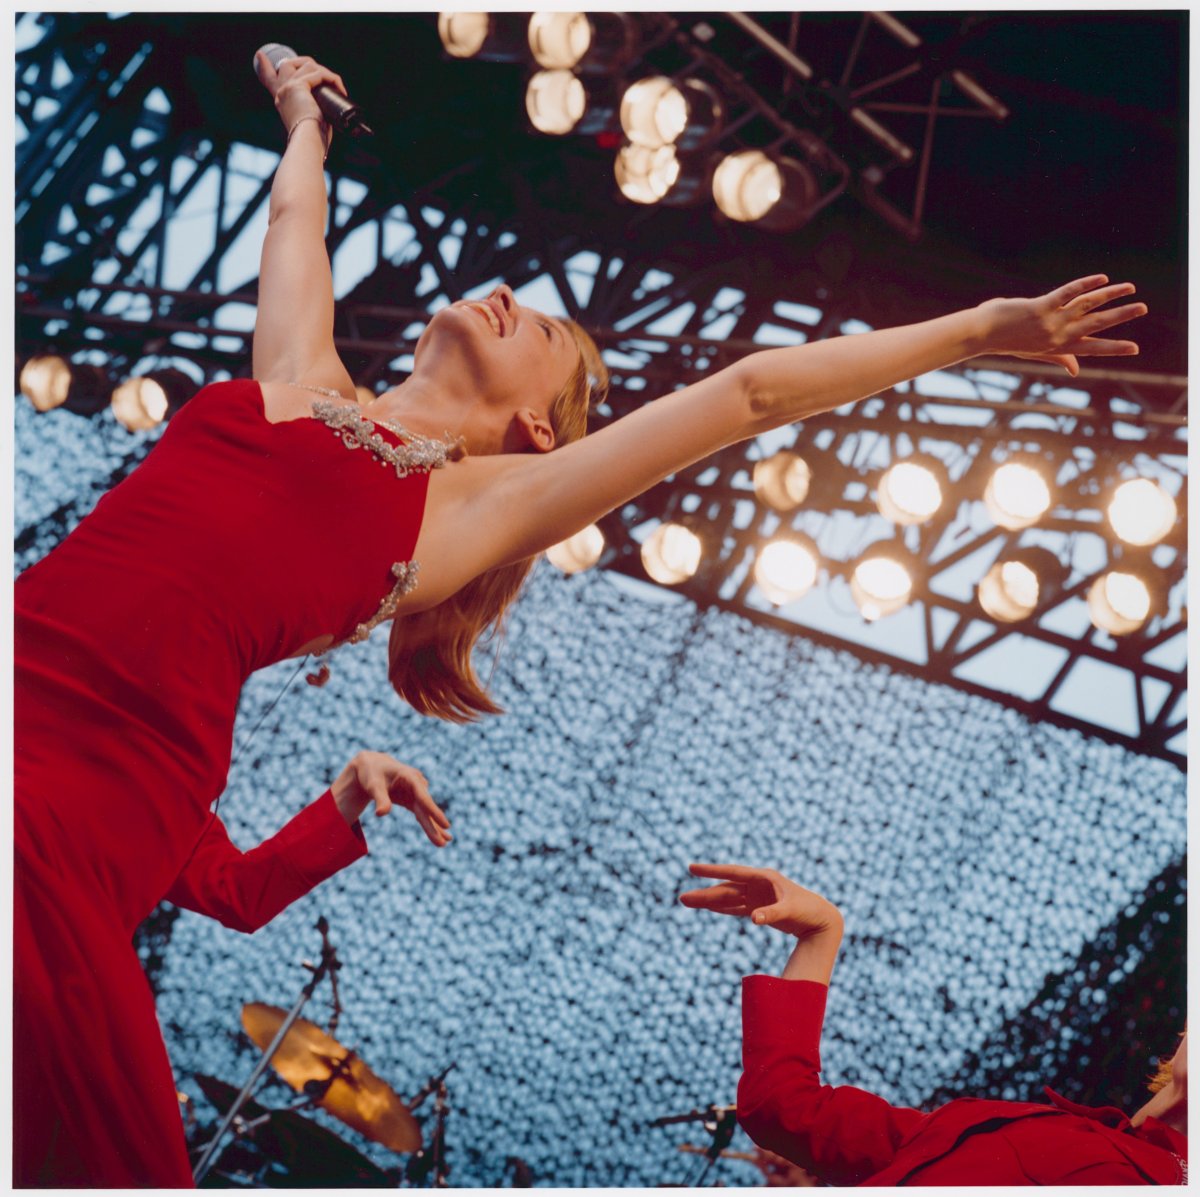 A woman in a red dress throws her hands up in the air while on stage. Behind her a backup dancer is performing. Many spotlights are shining on the stage